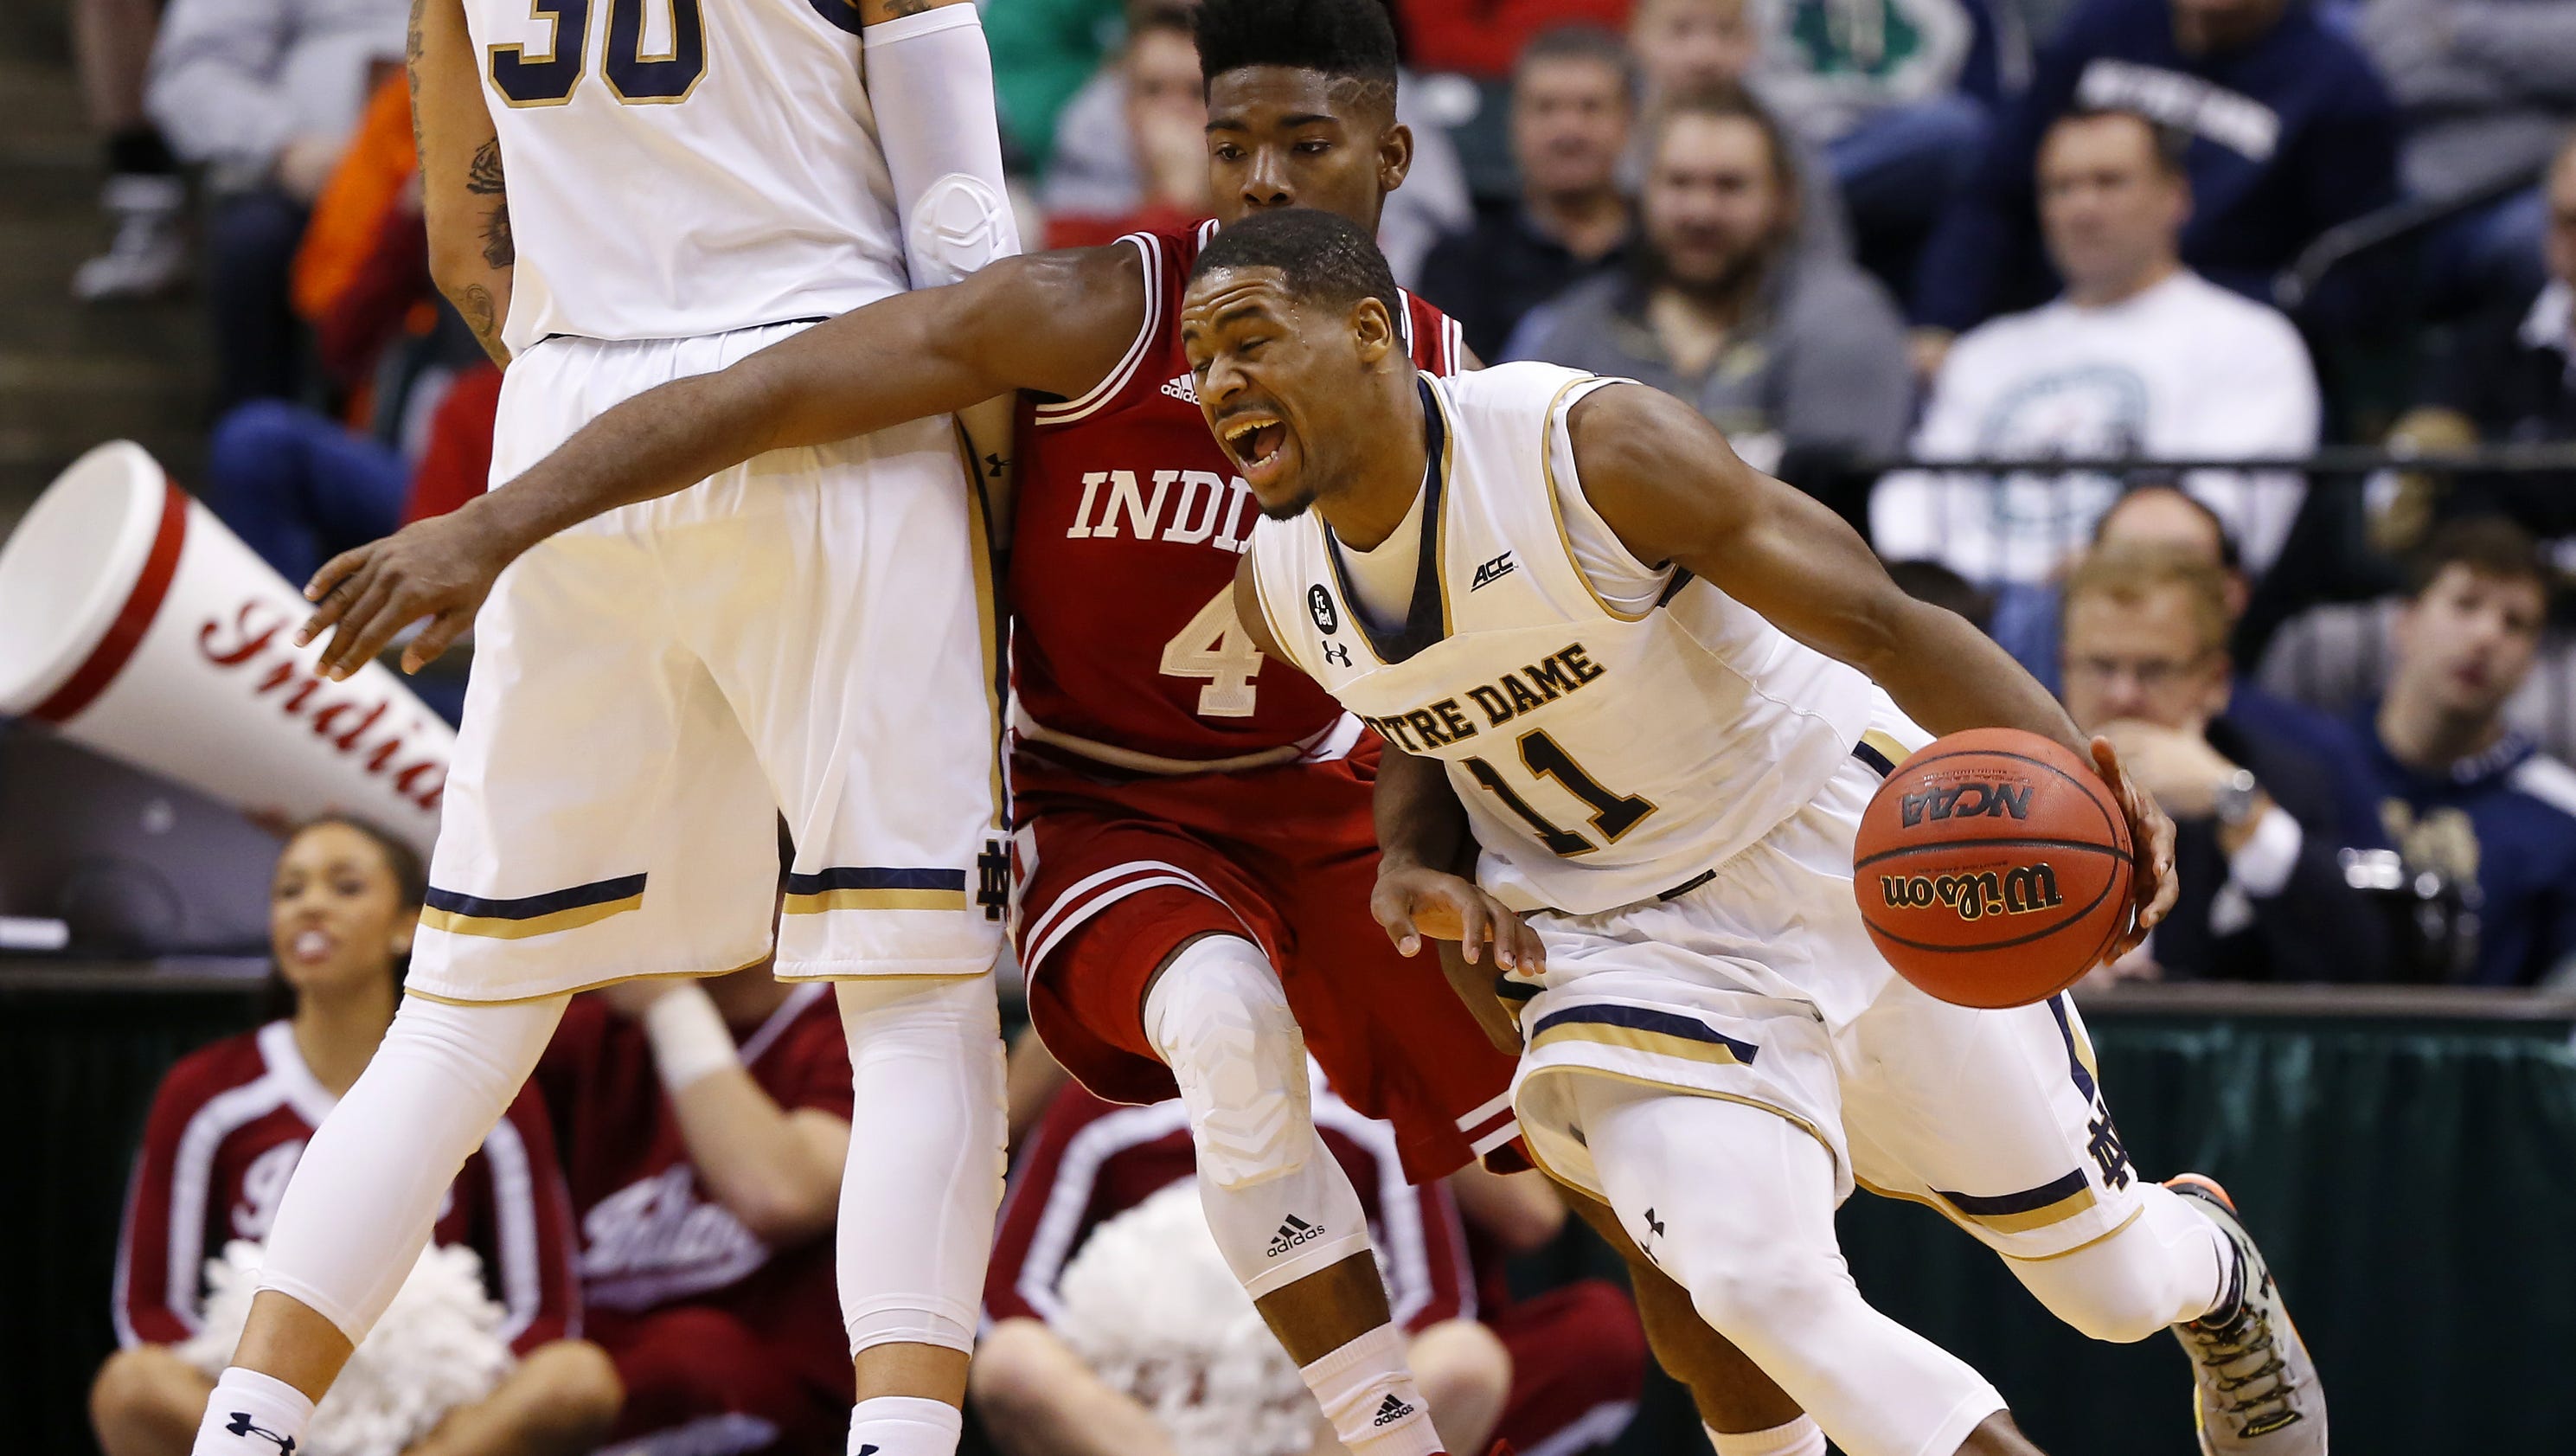 Names of players with Indiana ties surface in FBI probe of NCAA basketball